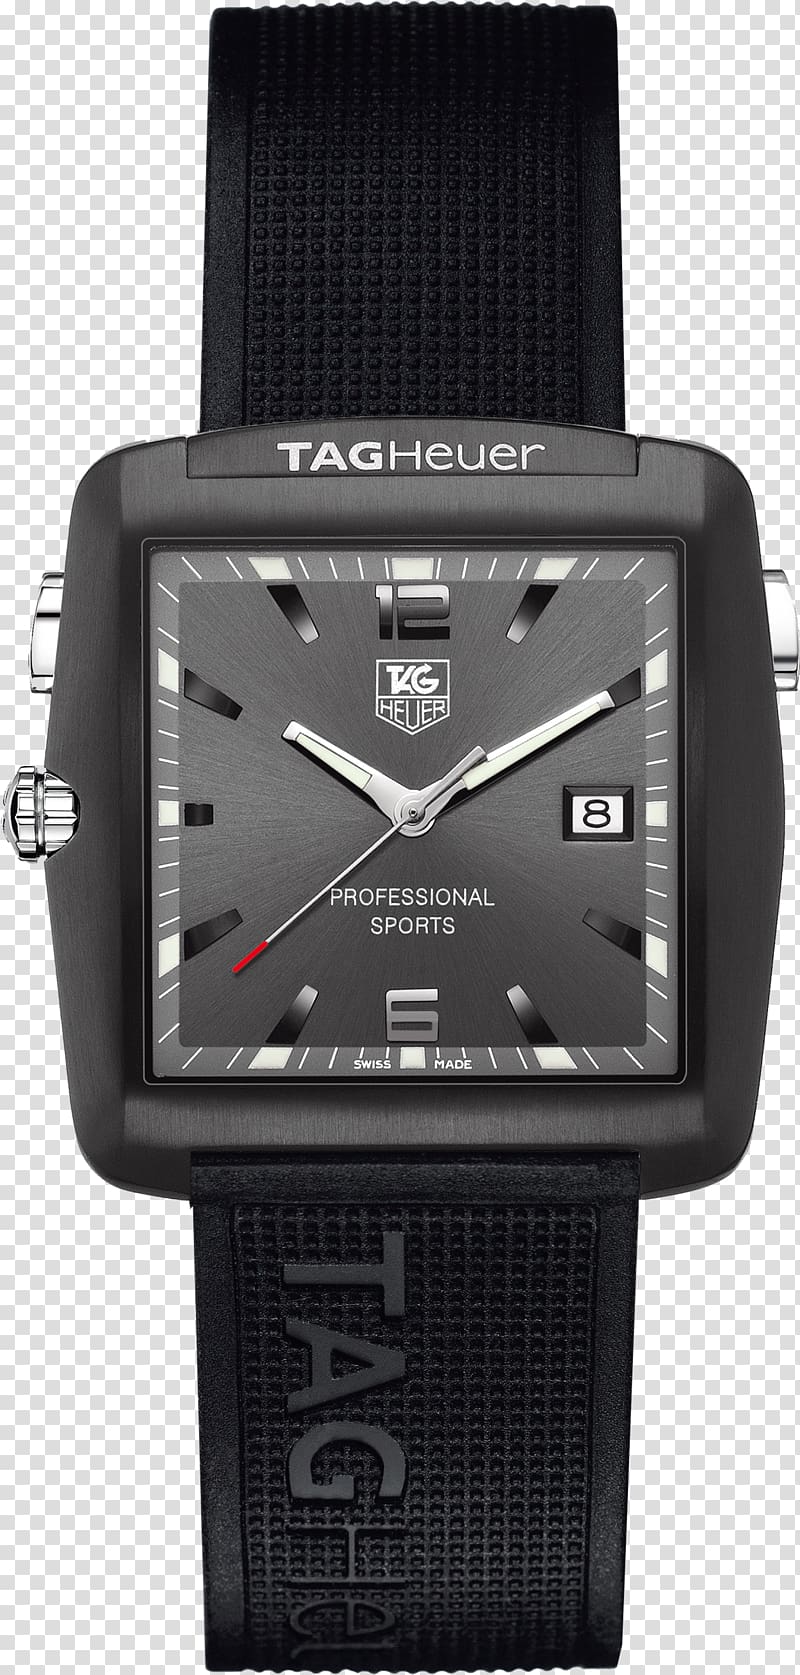 TAG Heuer Counterfeit watch Professional sports, watch transparent background PNG clipart